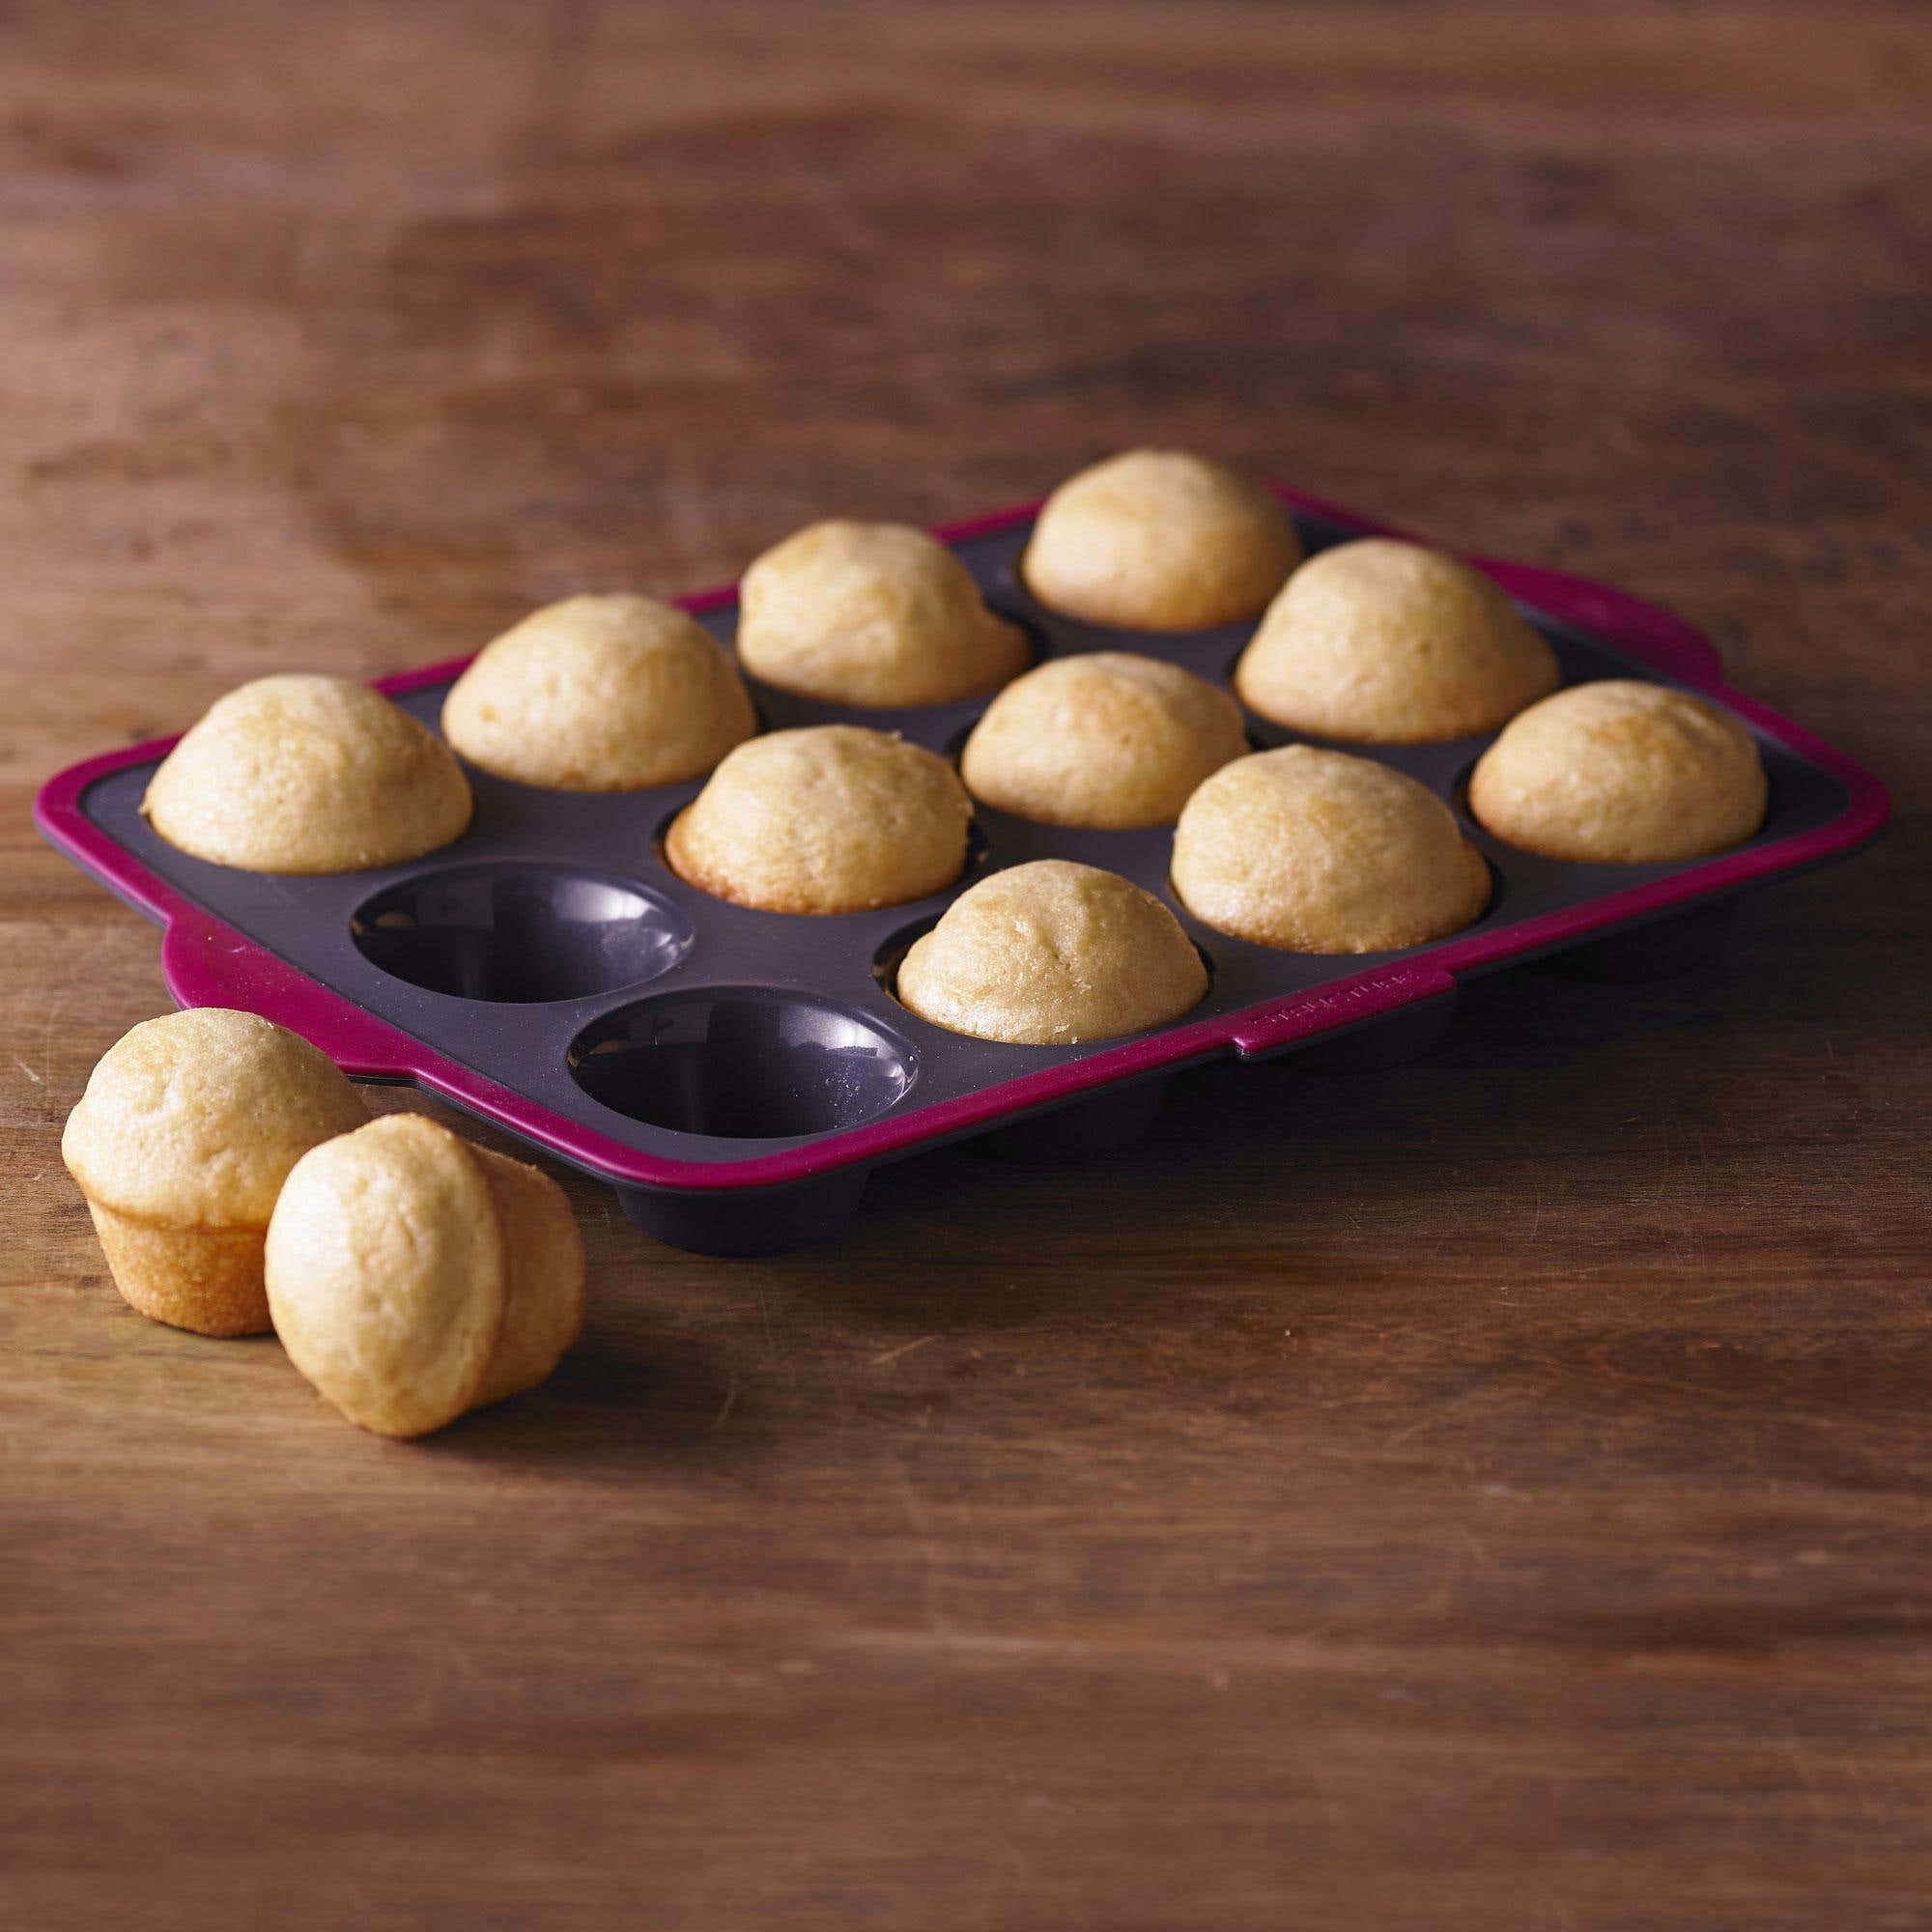 Pro Muffin Pan 12 Count - Silicone